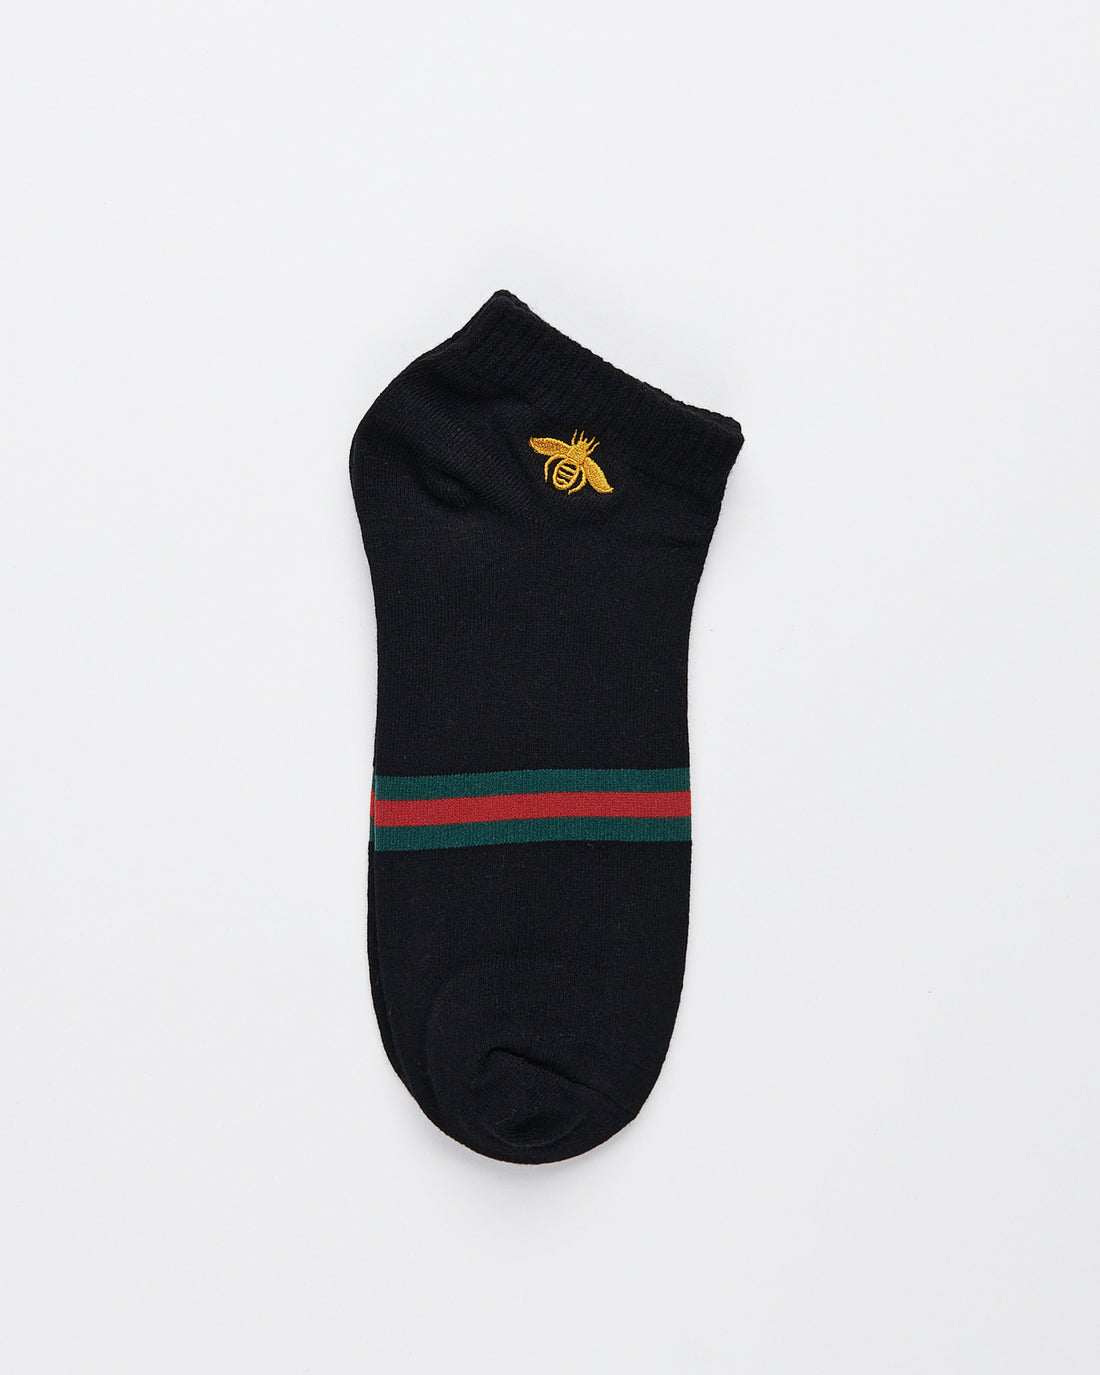 GUC Bee Embroidered Black Low Cut 1 Pairs Socks 1.90